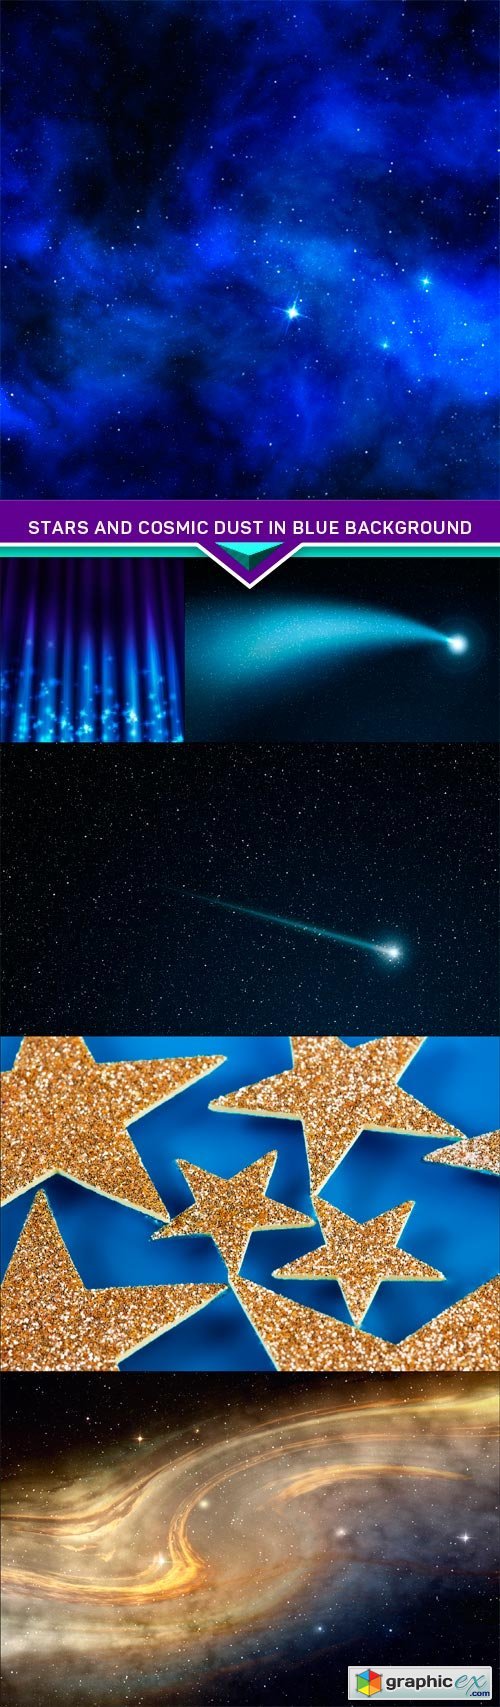 Stars and cosmic dust in blue background 6X JPEG